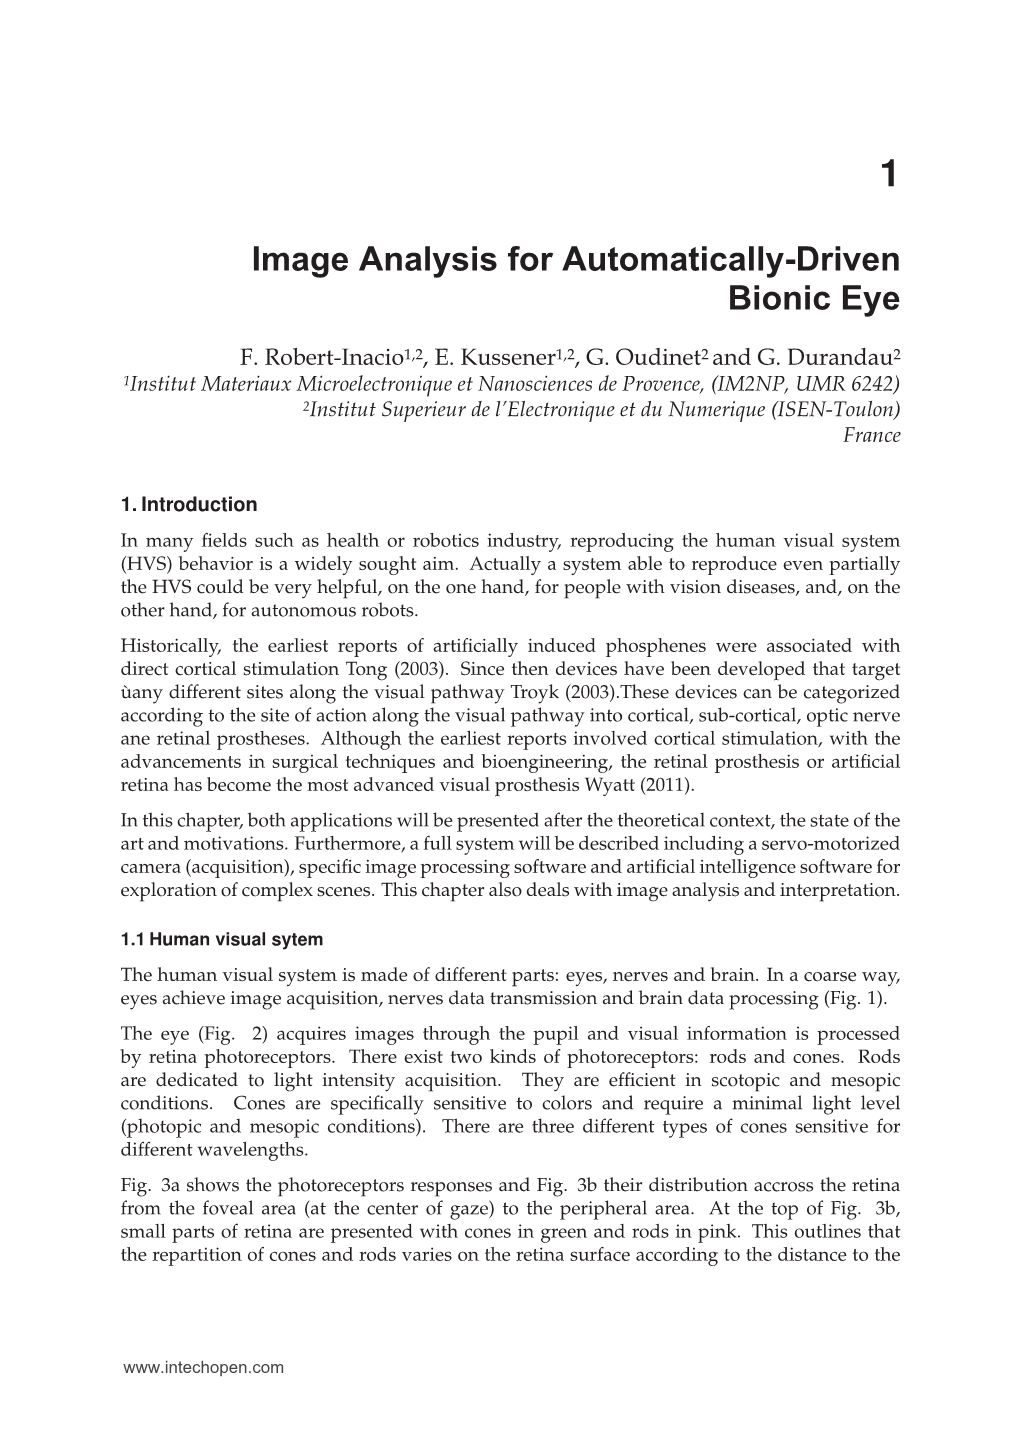 Image Analysis for Automatically-Driven Bionic Eye